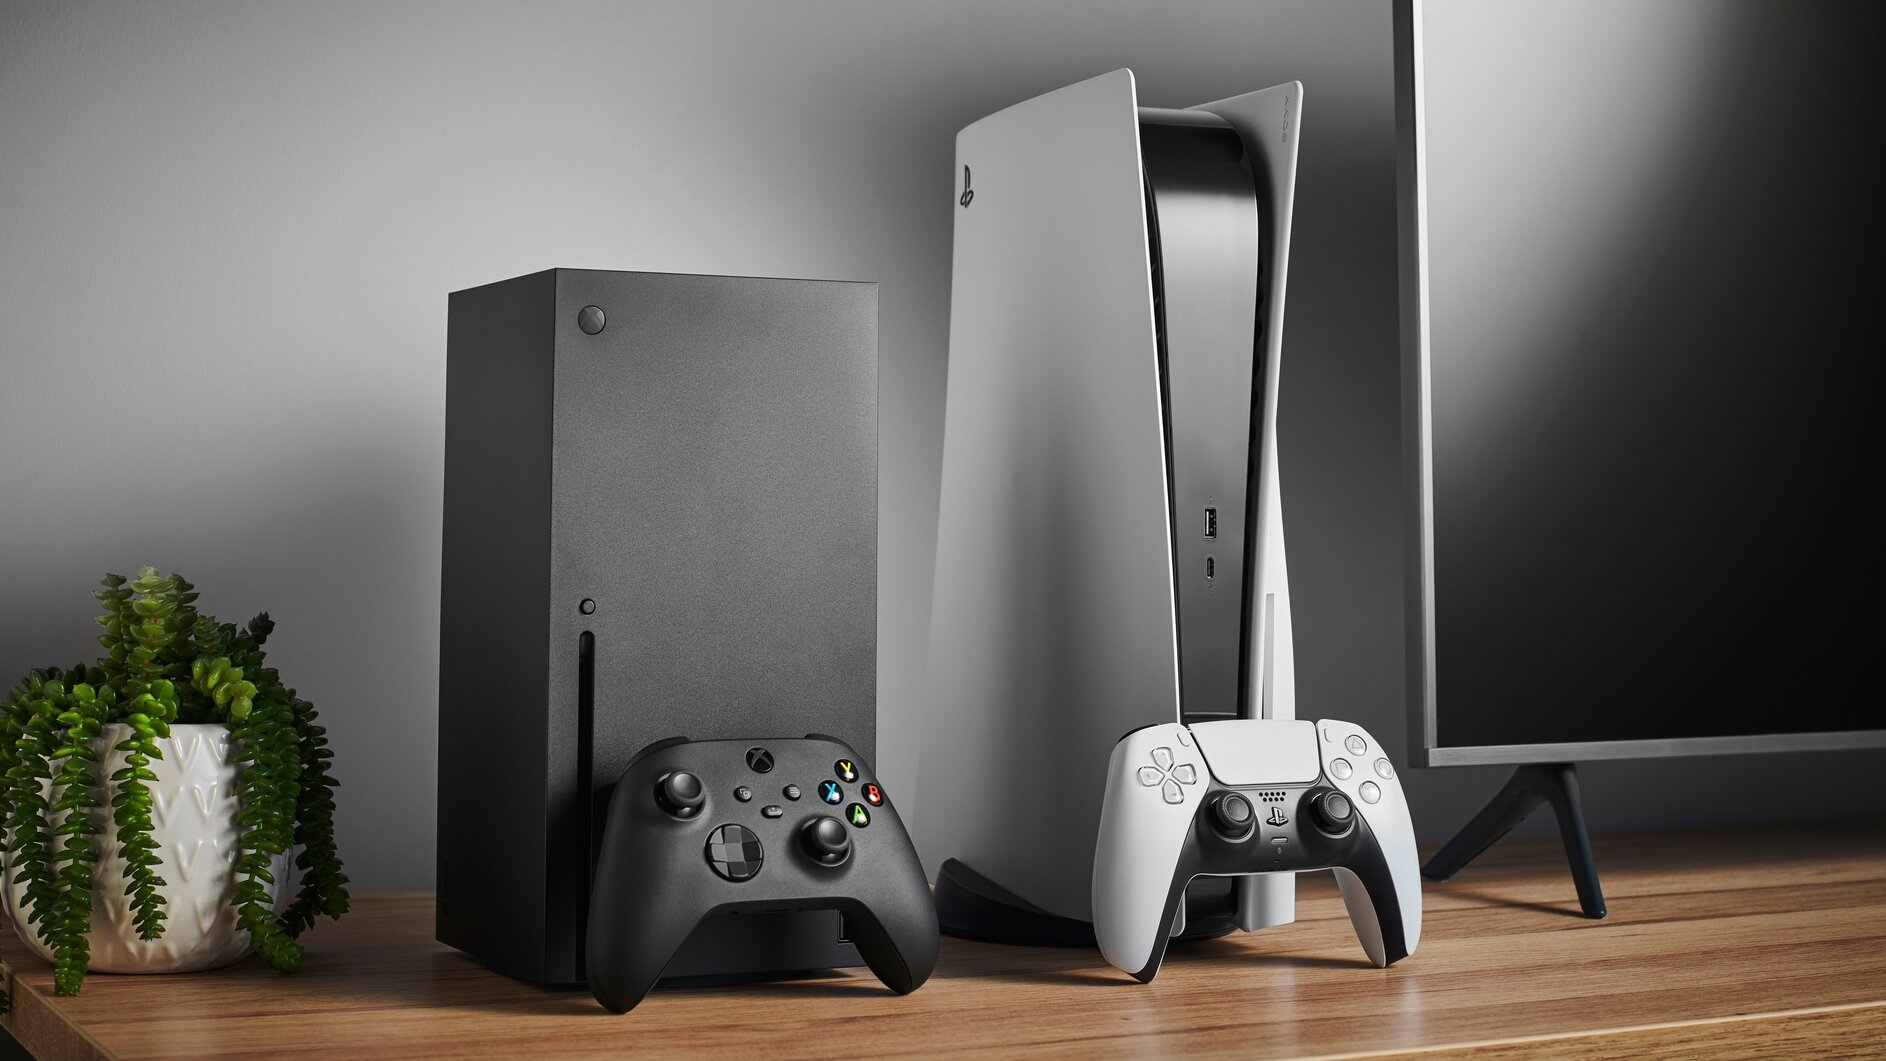 The reasons behind the video game console shortage